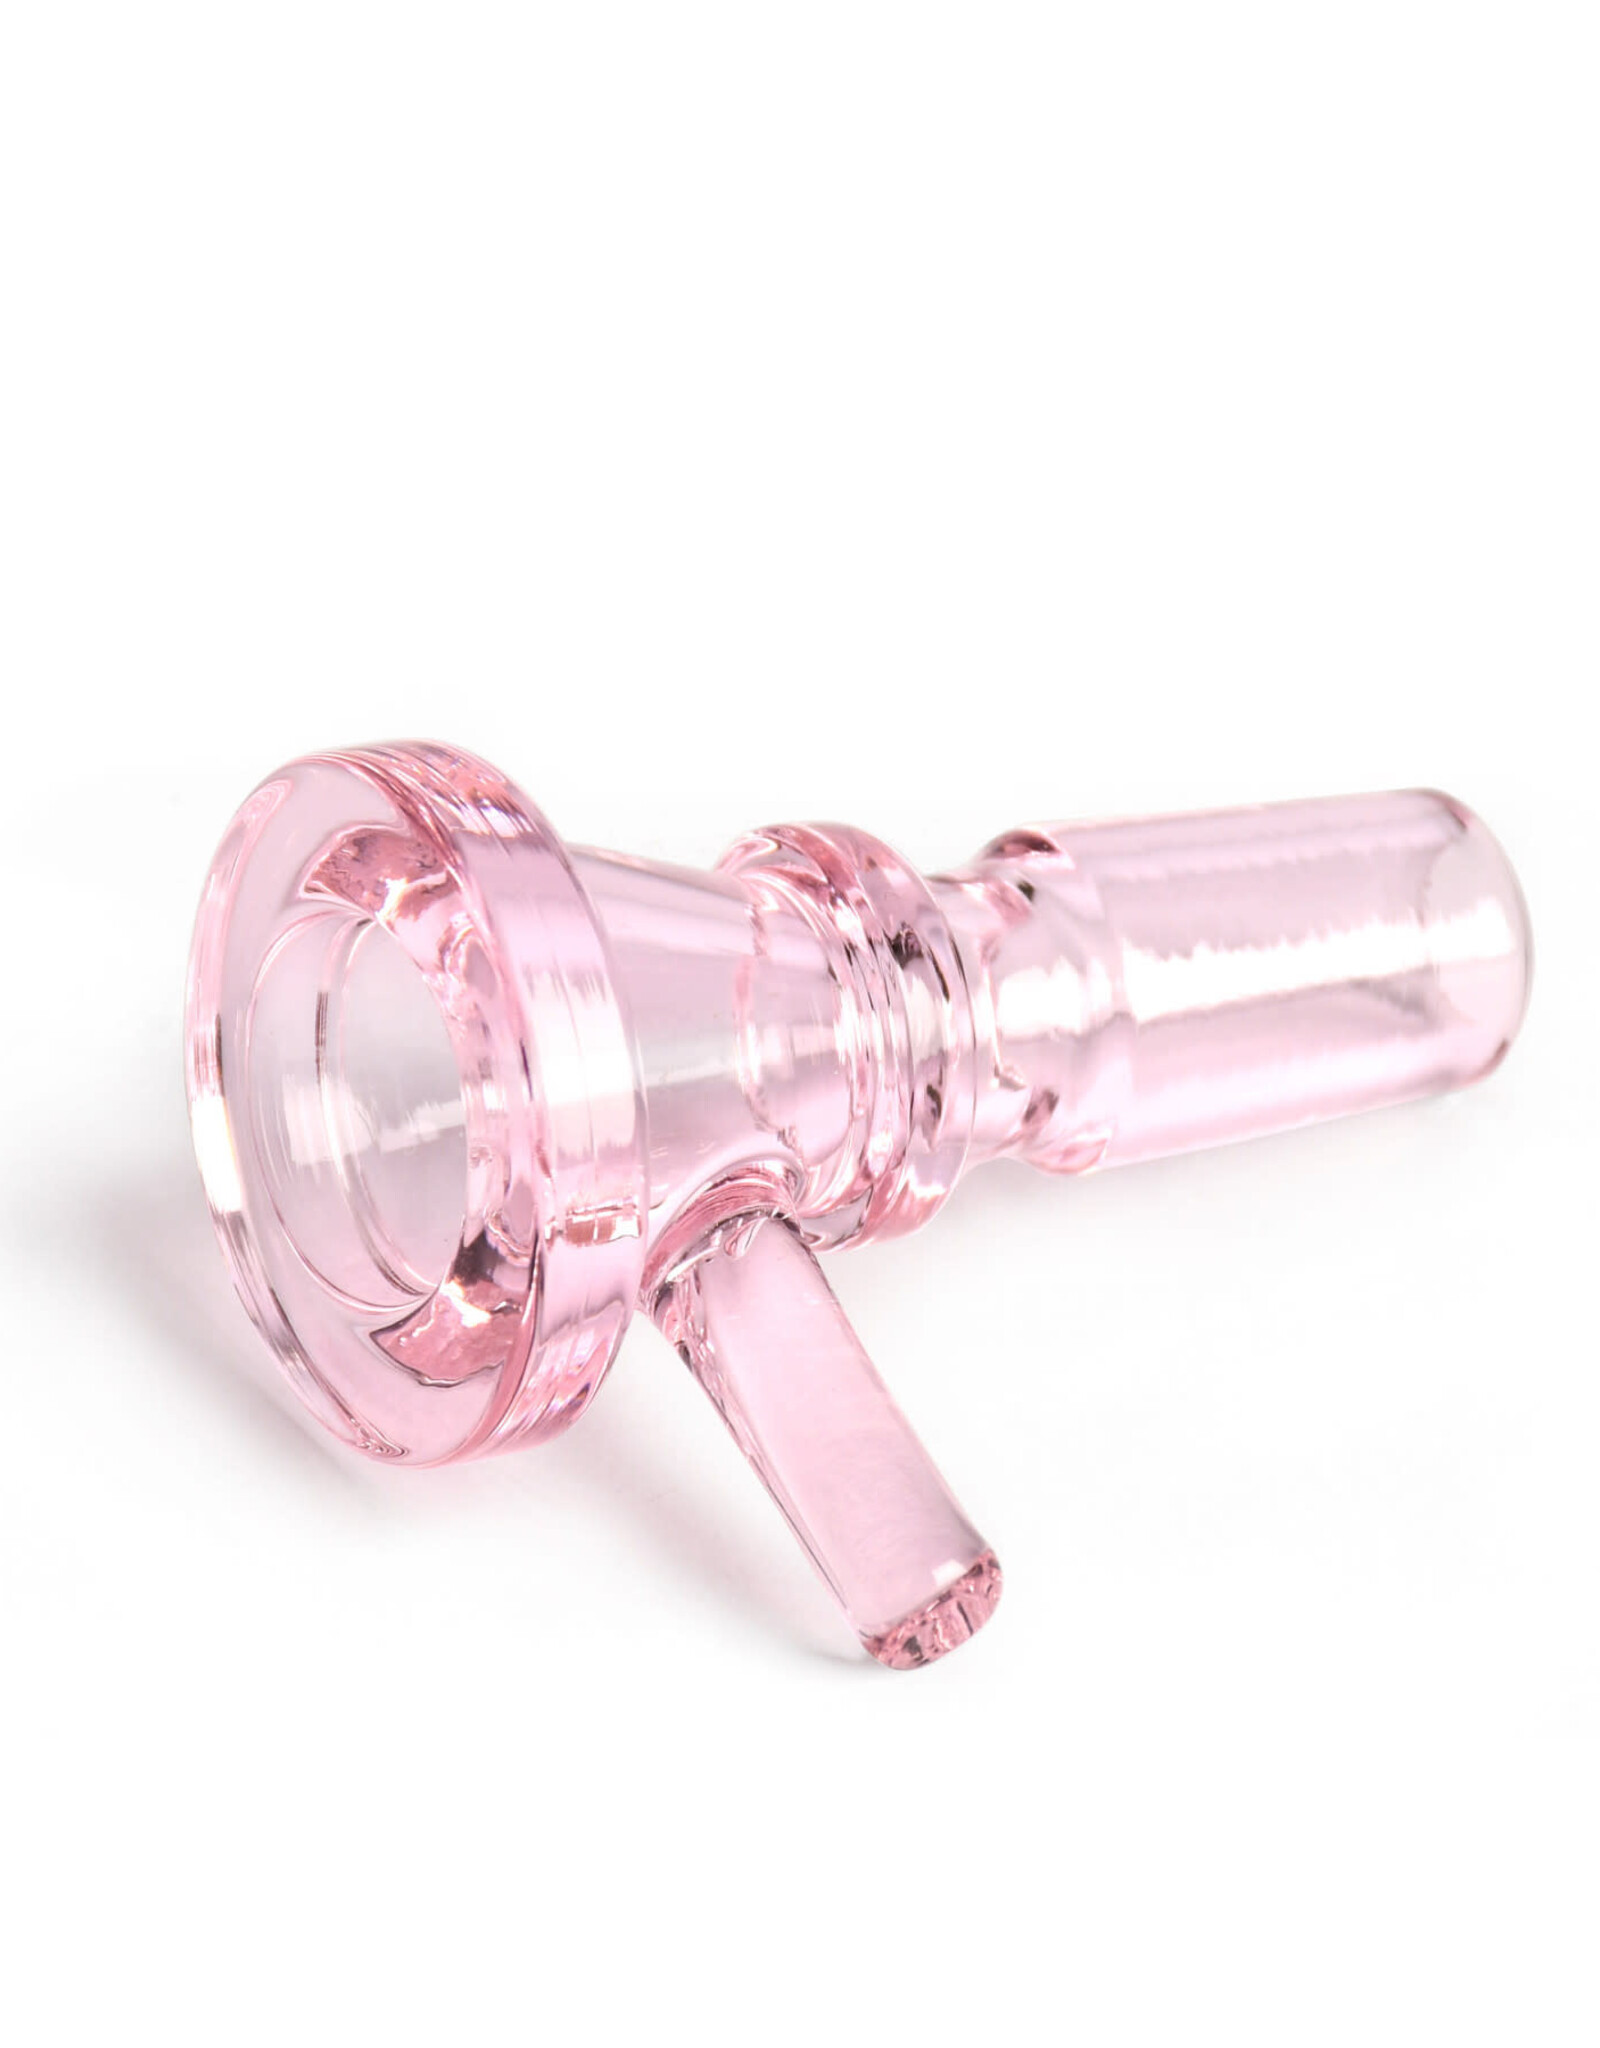 West Coast Gifts 14mm Blaster Cone Pull-Out PINK